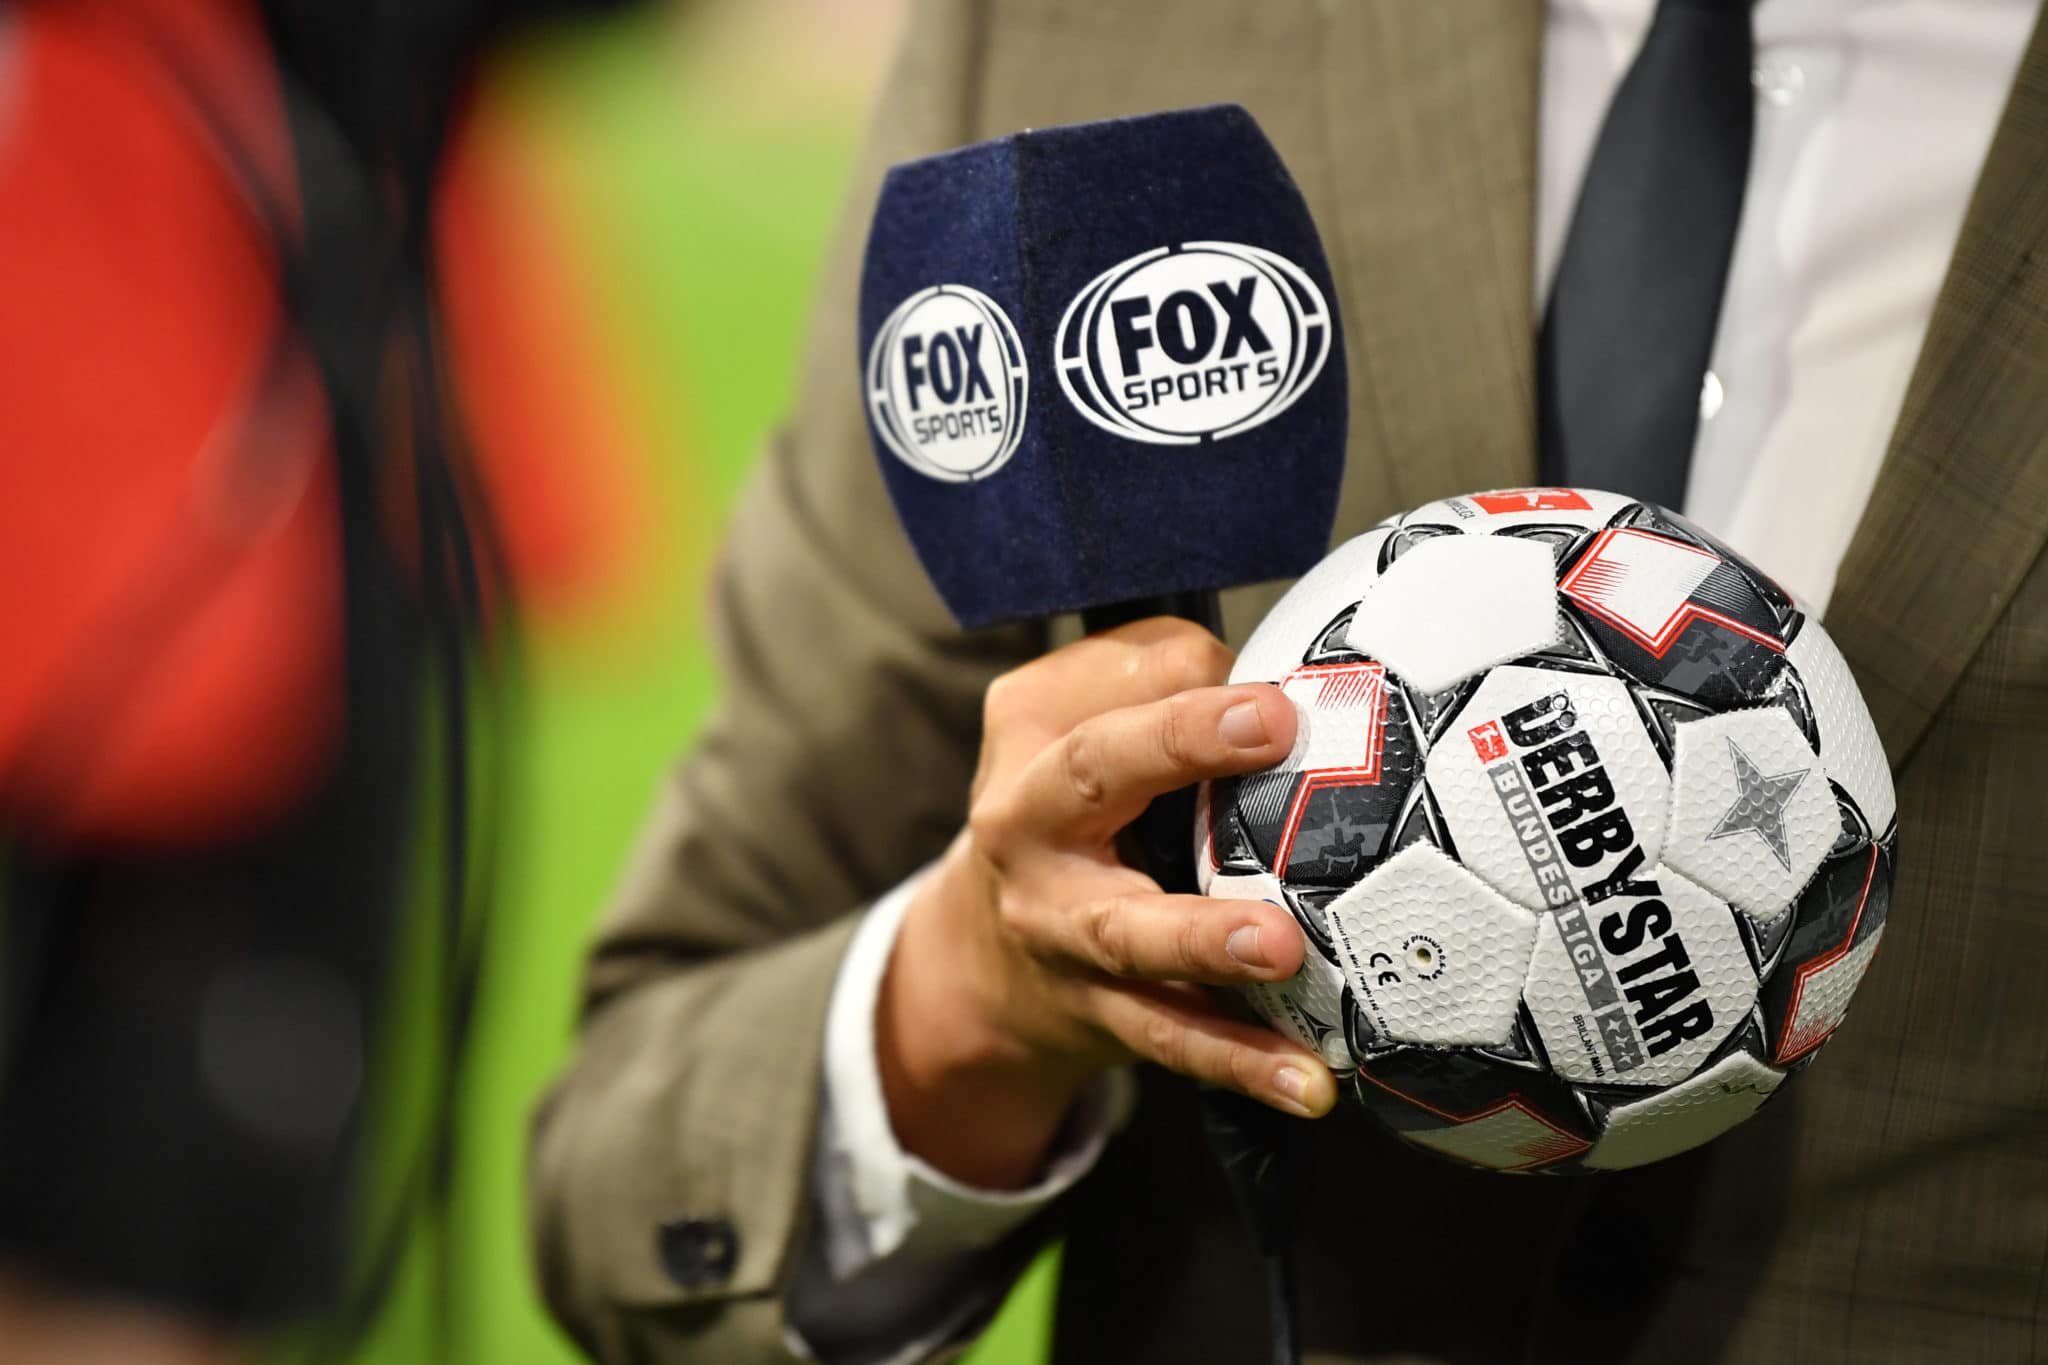 Dutch Fox Sports Channel Adds Anti-Semitic Chants to Soundtrack of Live Soccer Match